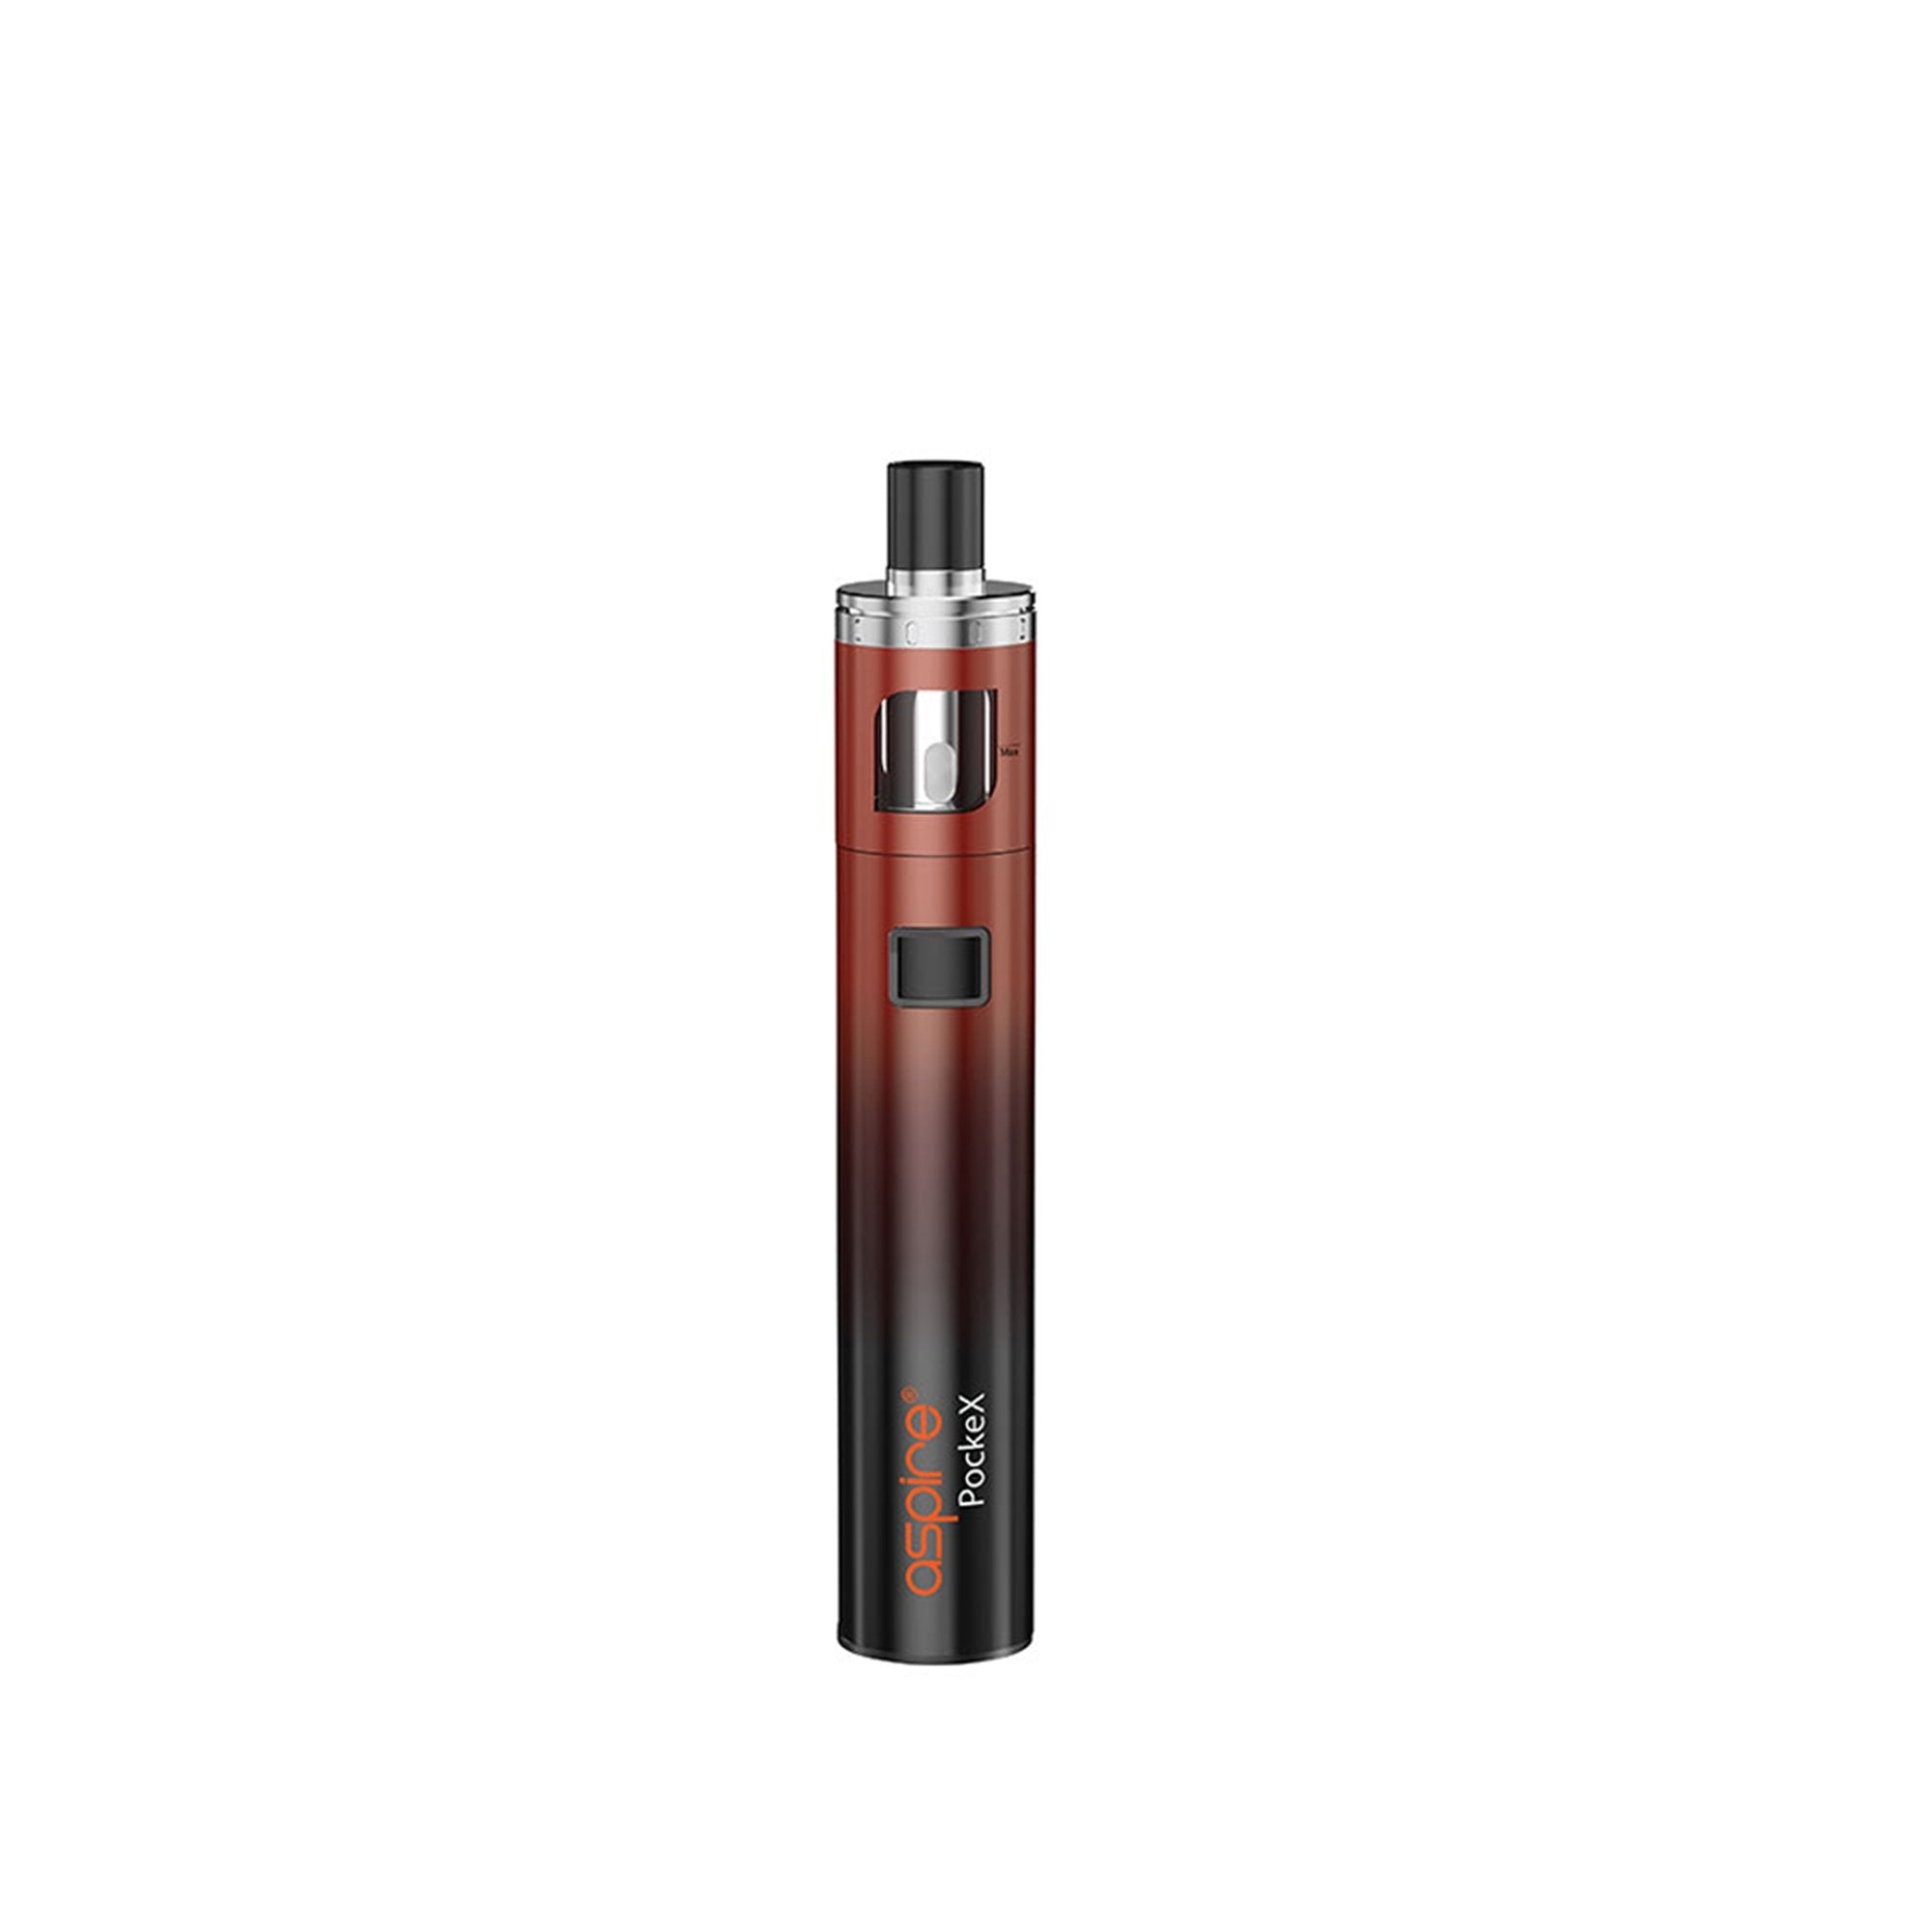 Aspire | PockeX AIO Kit | Wolfvapes - Wolfvapes.co.uk-Red Gradient